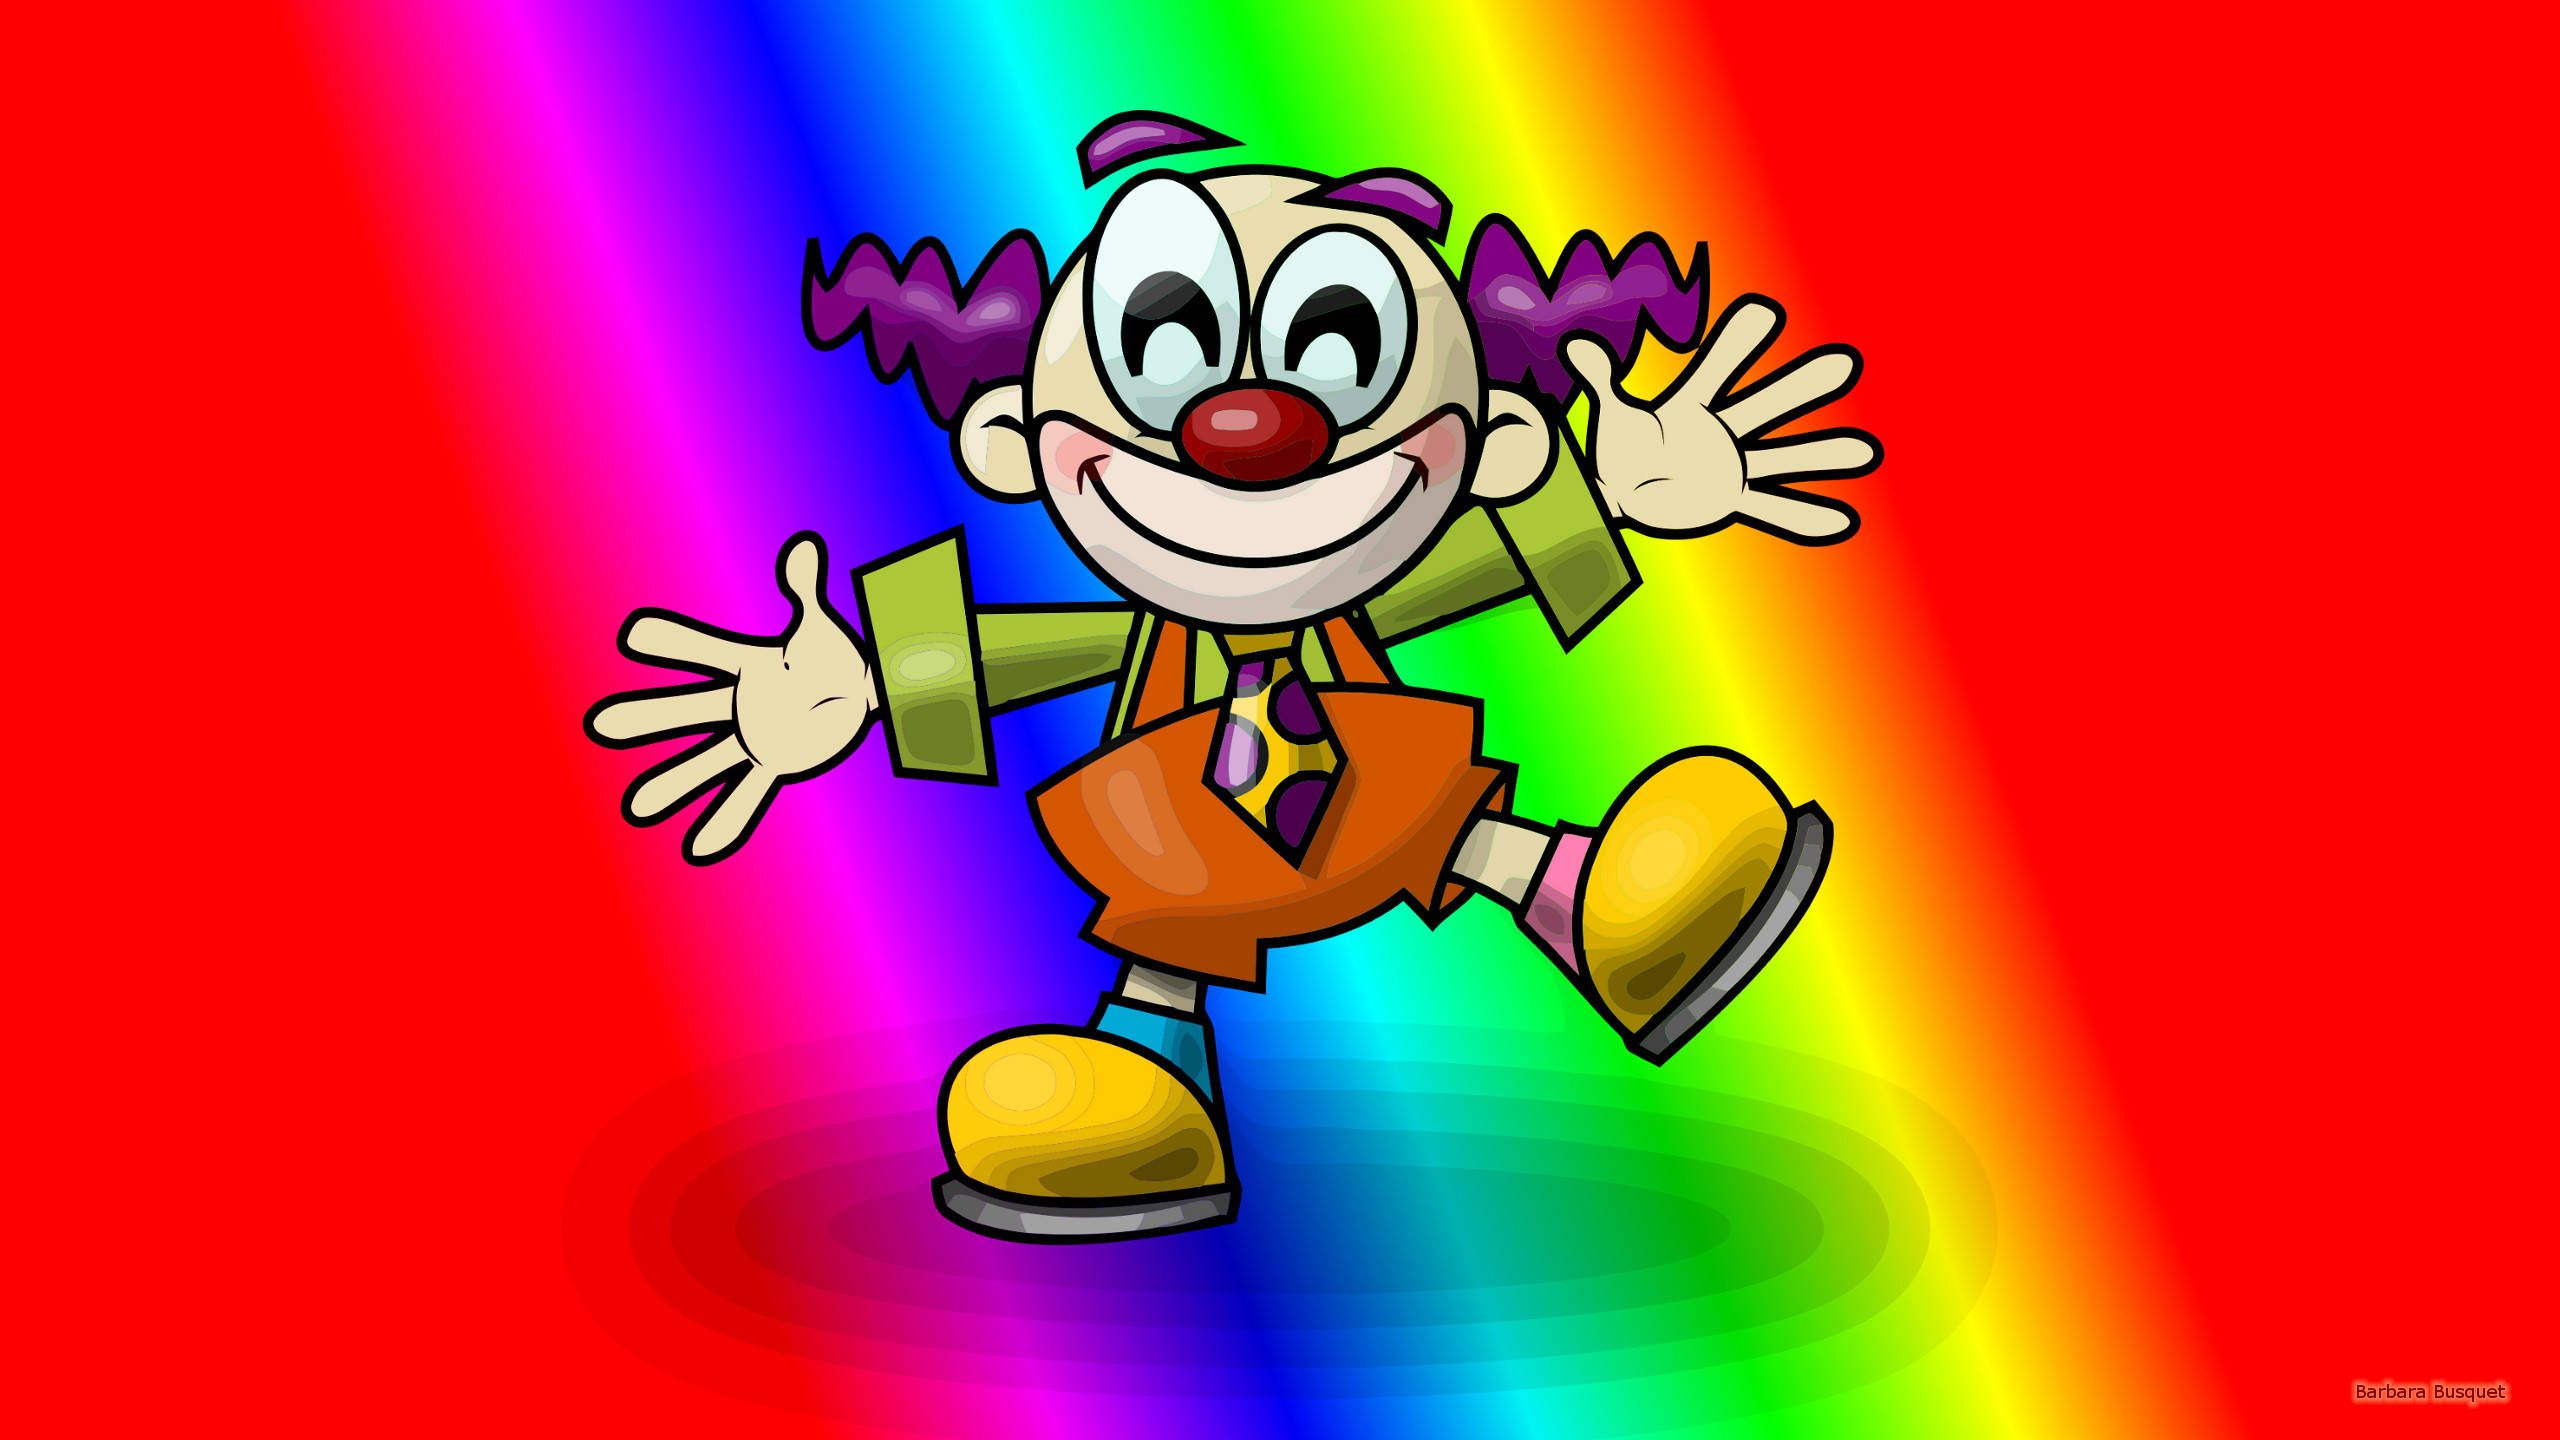 The clown is standing on a rainbow background - Clown